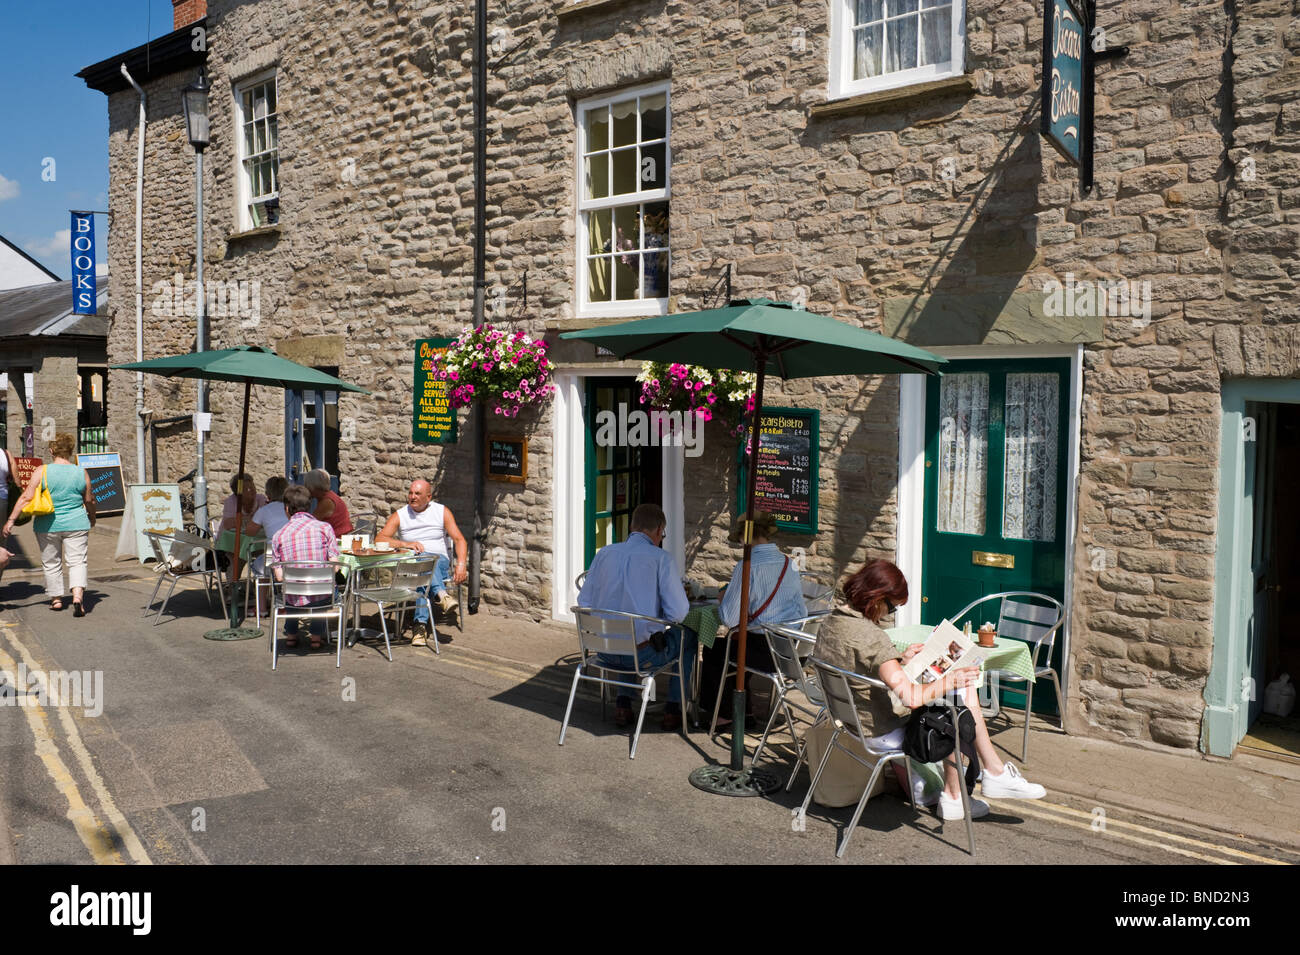 People eating and drinking outside café in Hay-on-Wye Powys Wales UK Stock Photo